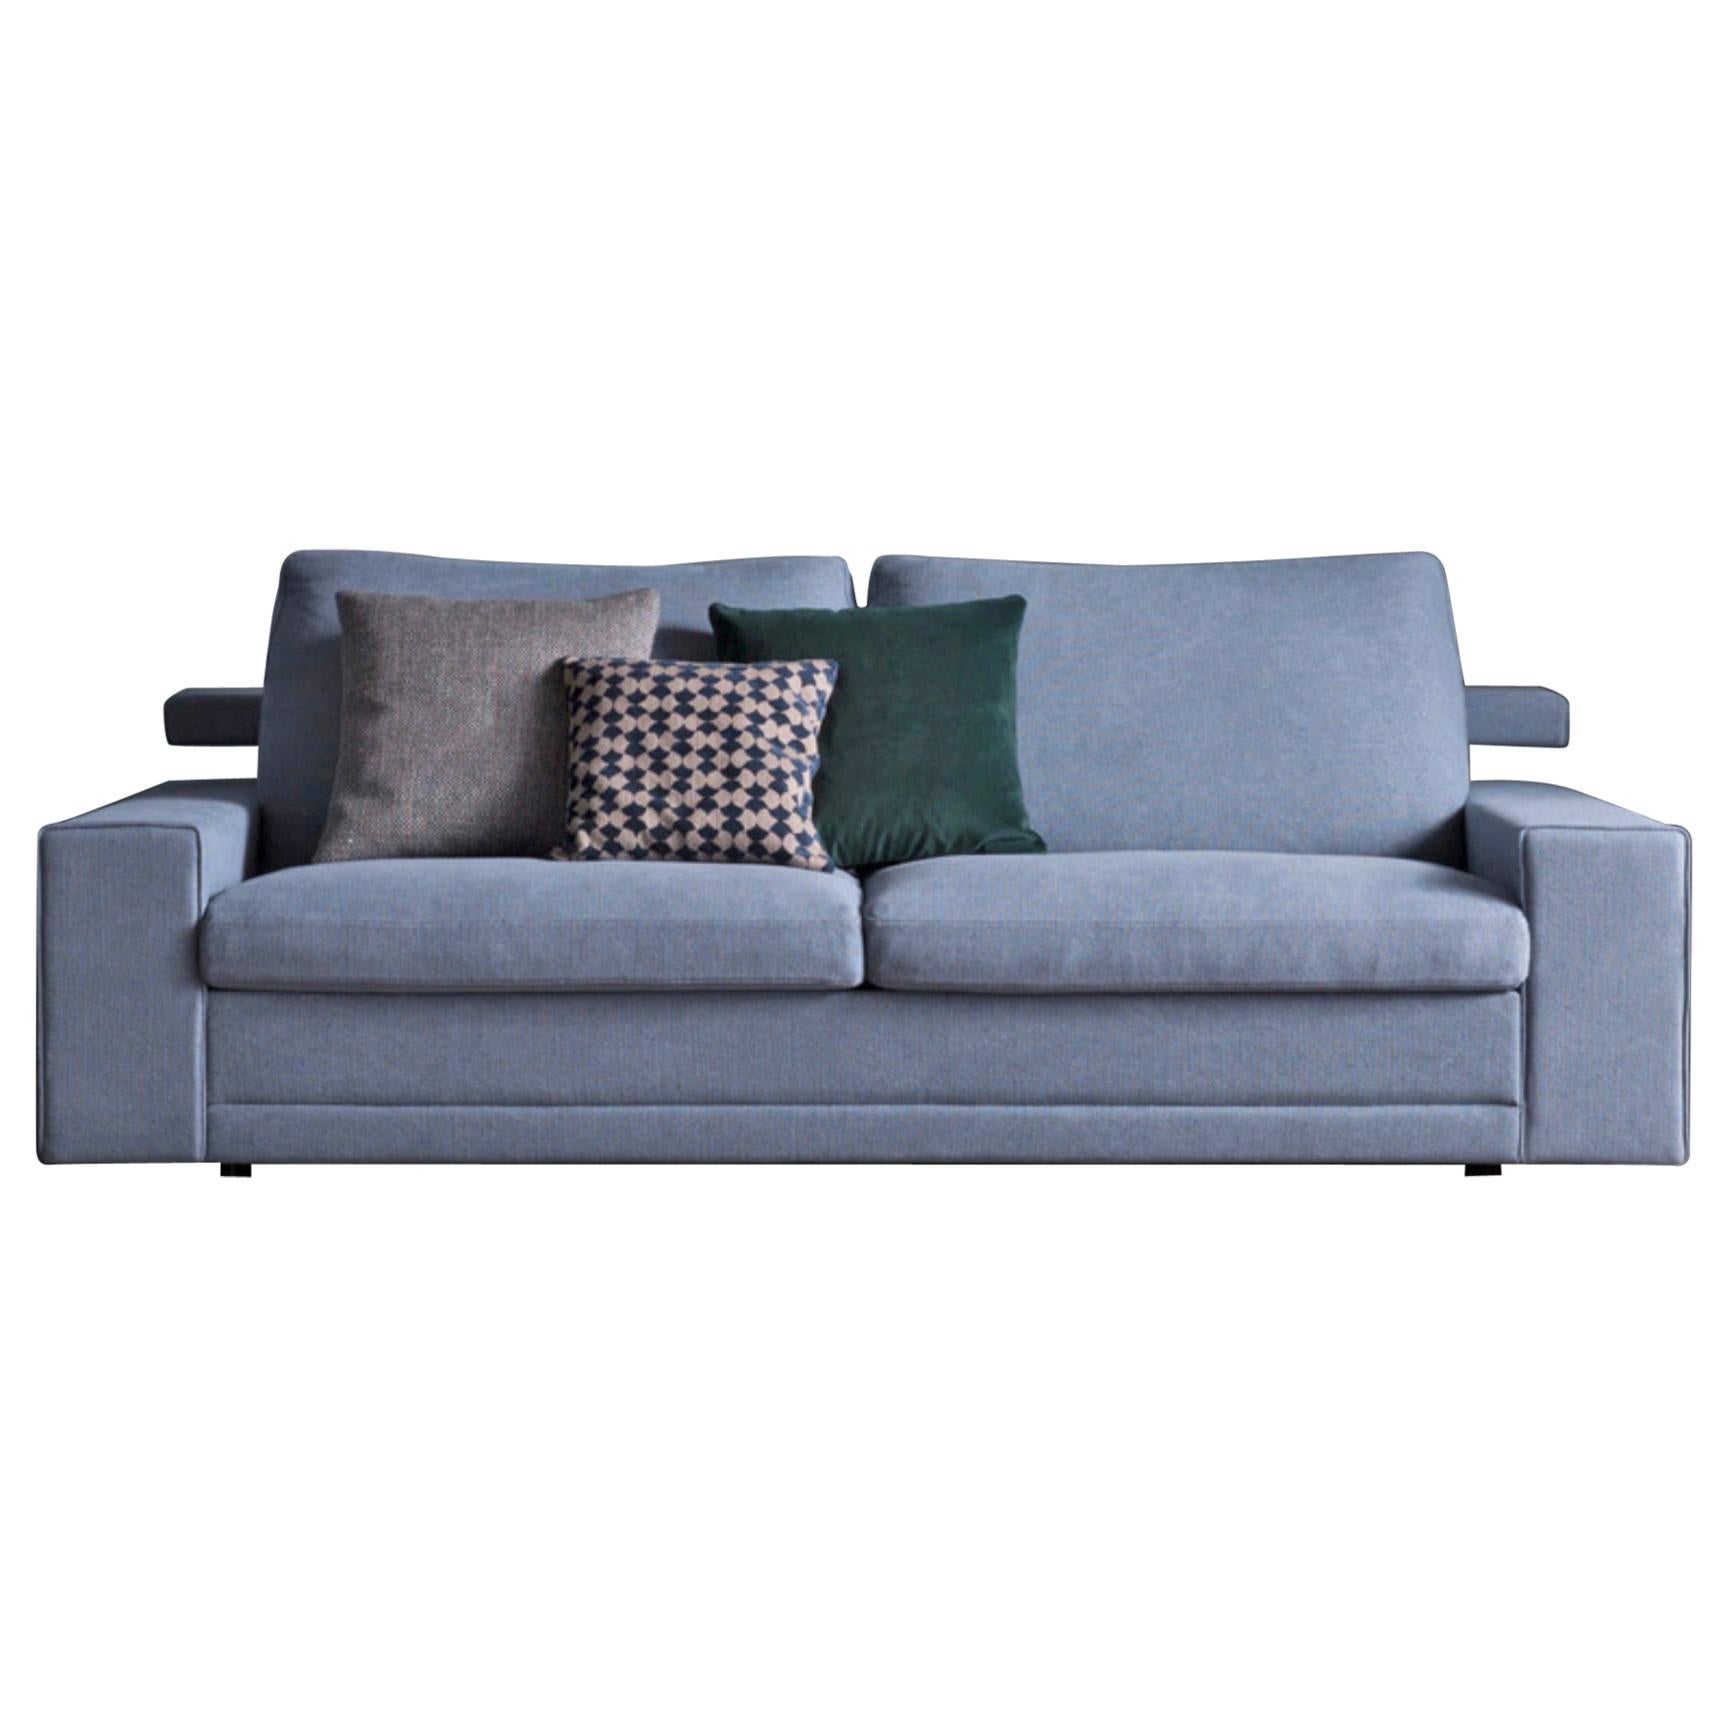 Italian Modern Sofa Bed with Flip Headrest, Made in Italy For Sale